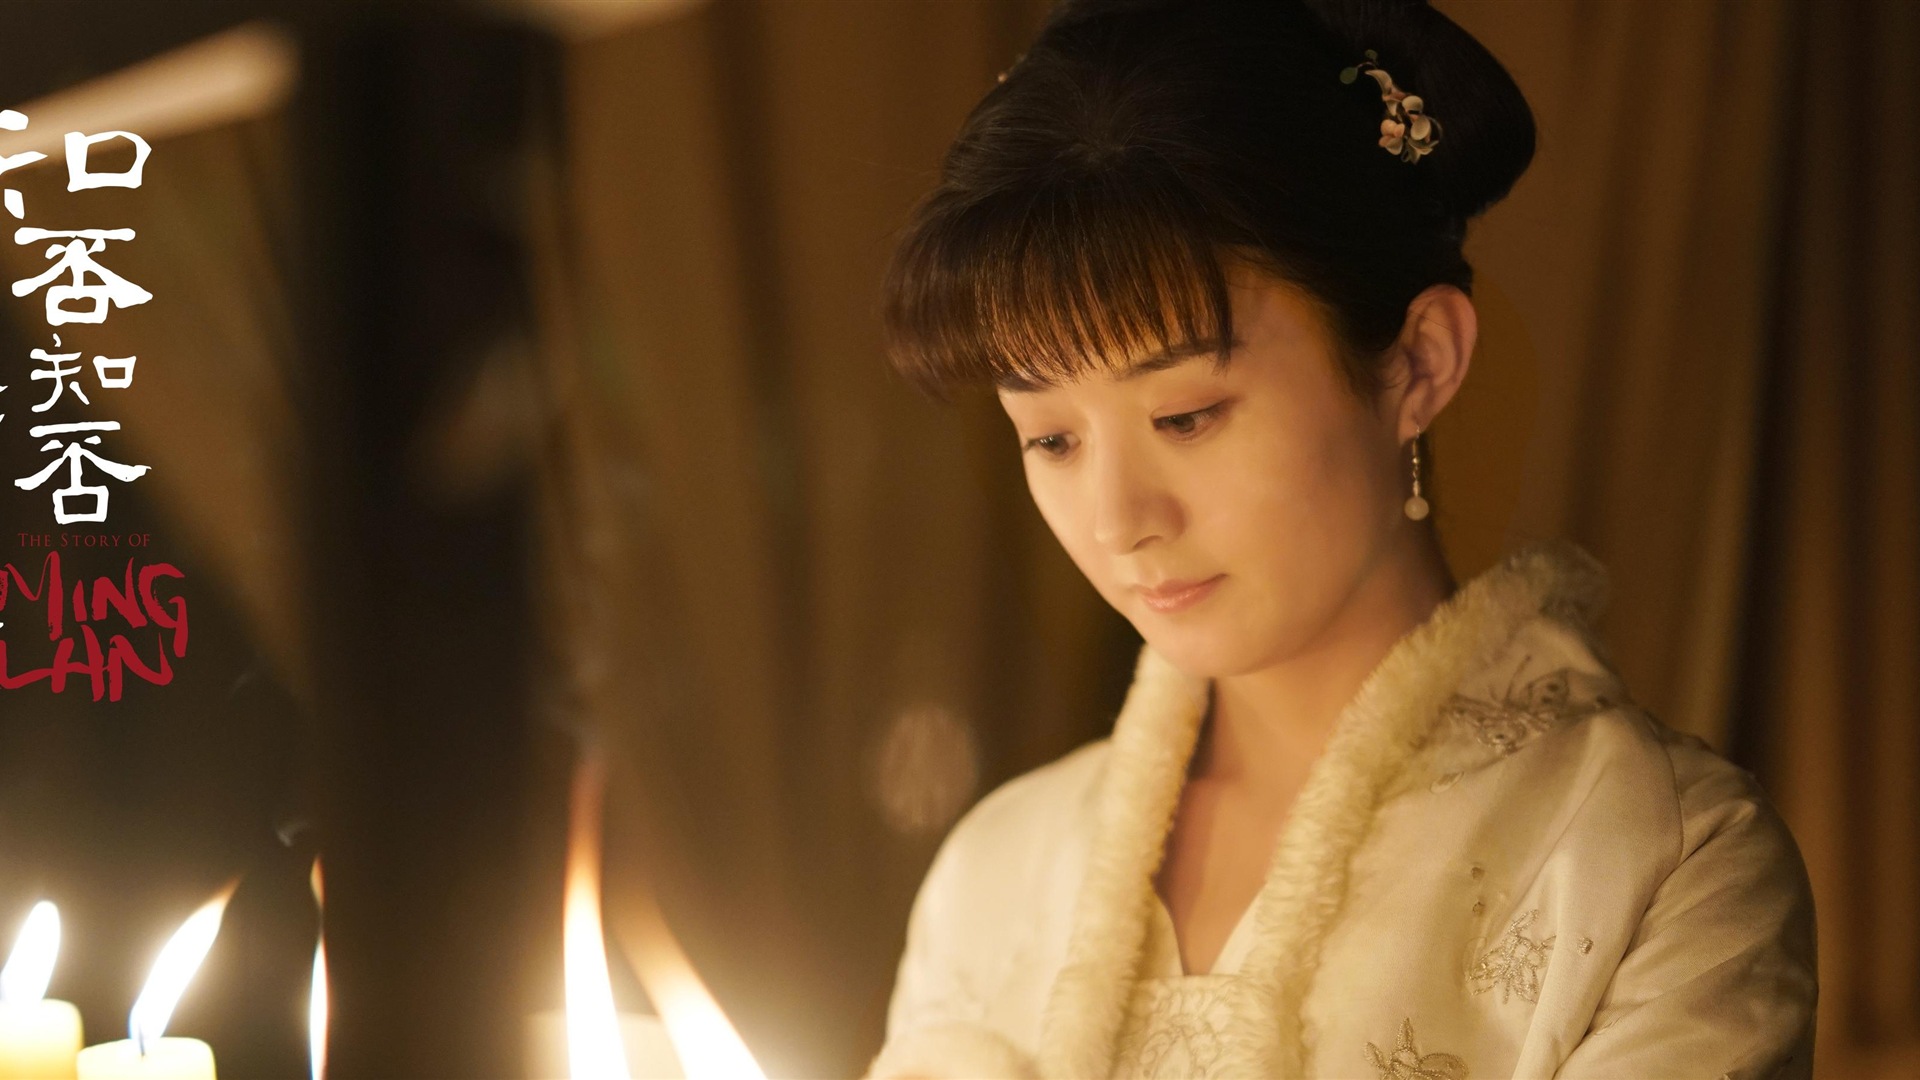 The Story Of MingLan, TV series HD wallpapers #41 - 1920x1080